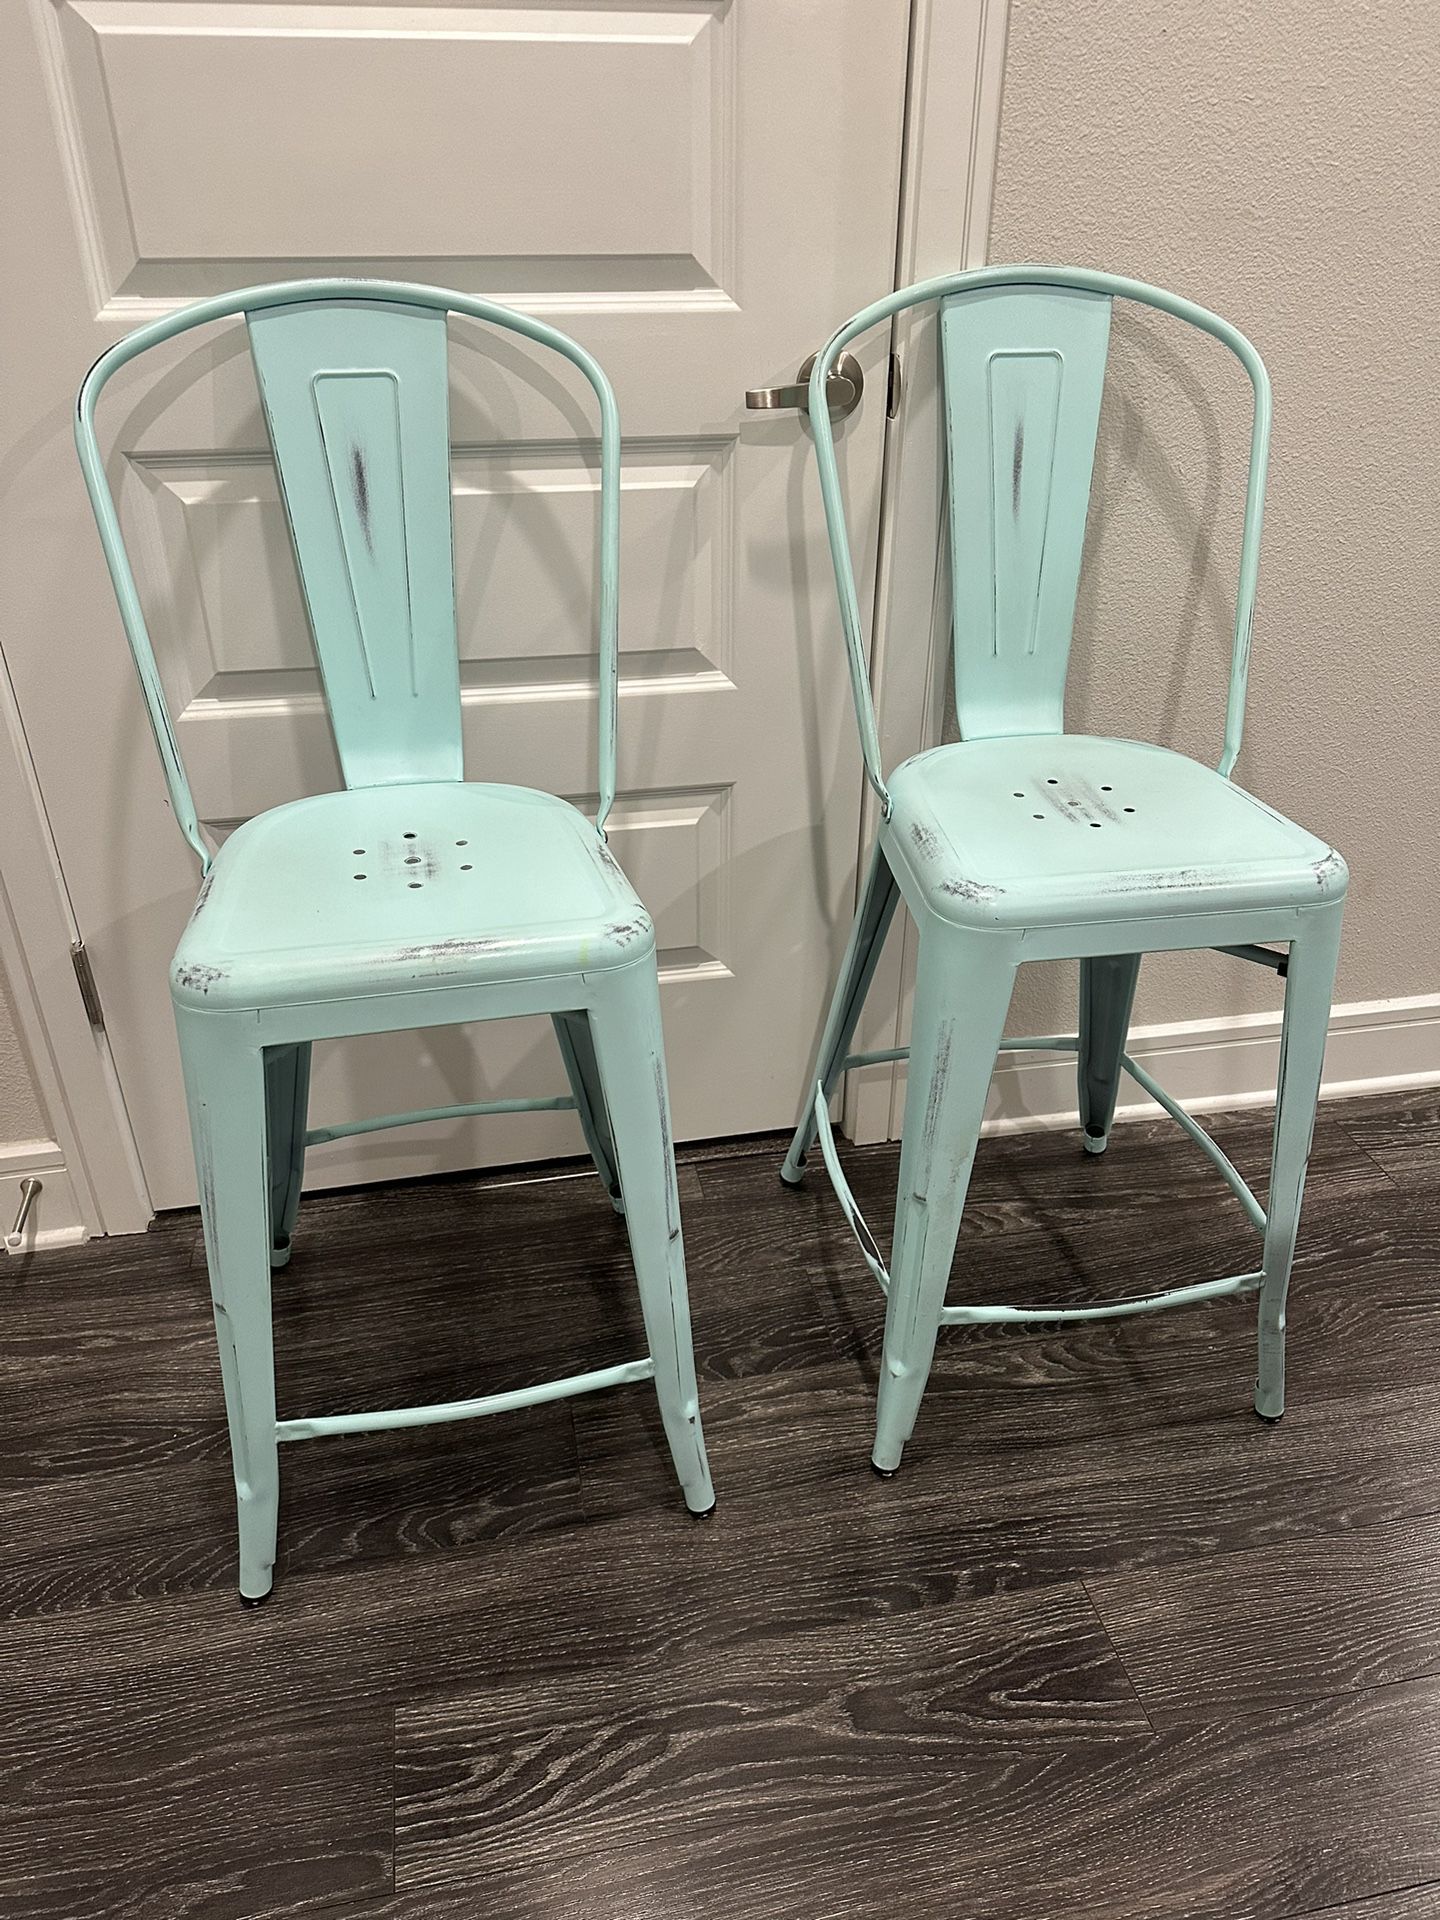 Pair Of Teal, Distressed Look Counter Stools From Wayfair